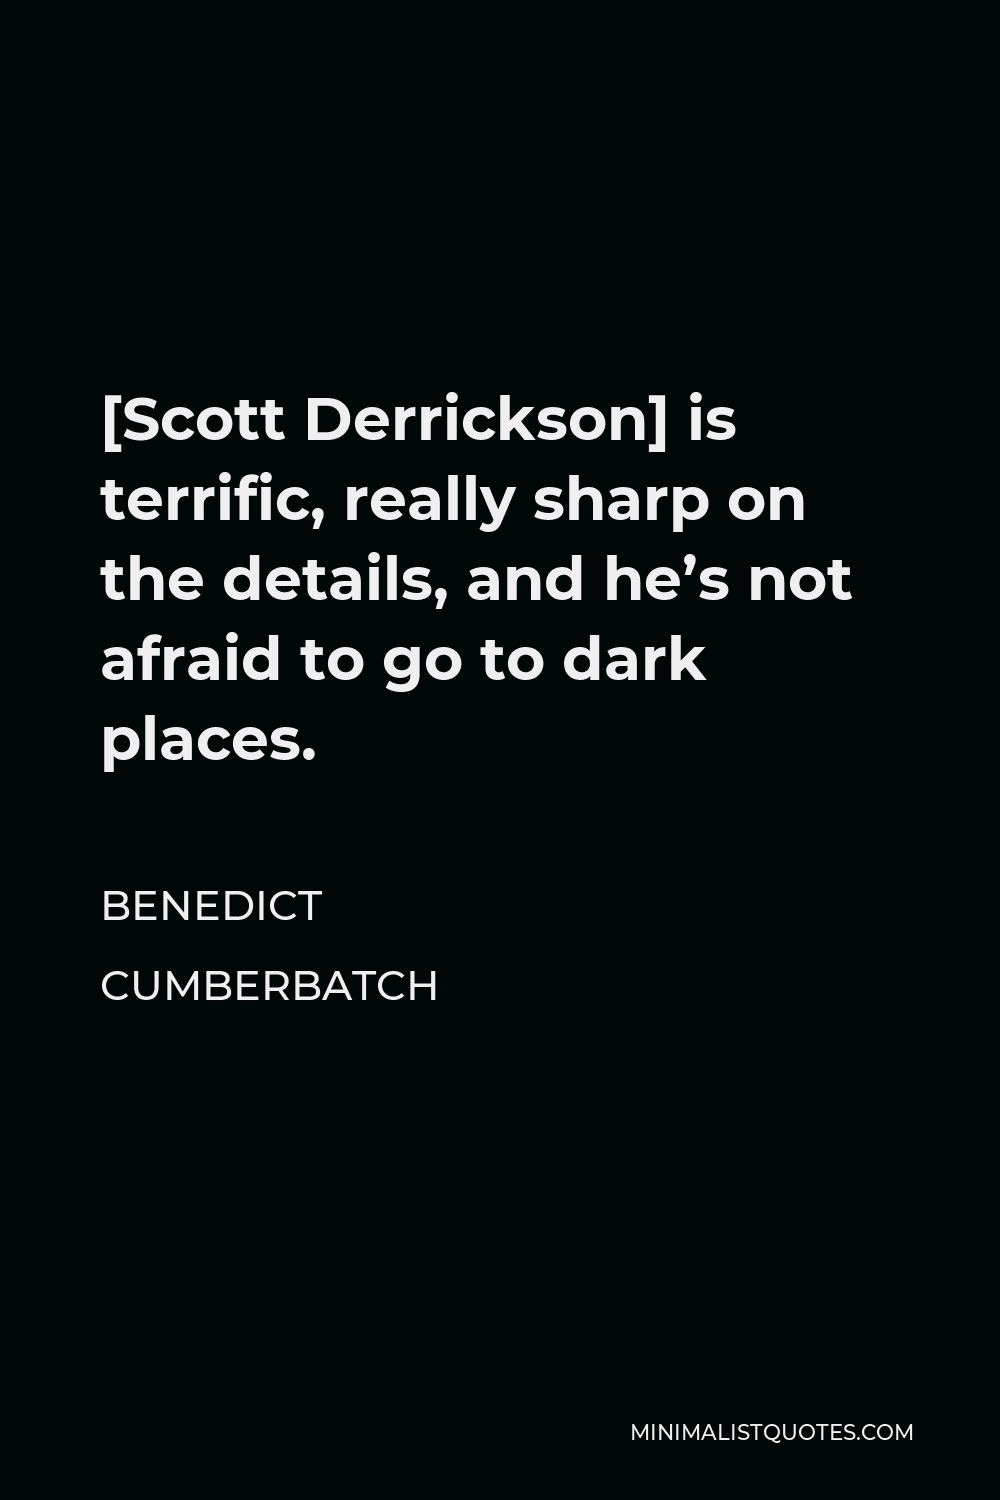 Benedict Cumberbatch Quote - [Scott Derrickson] is terrific, really sharp on the details, and he’s not afraid to go to dark places.